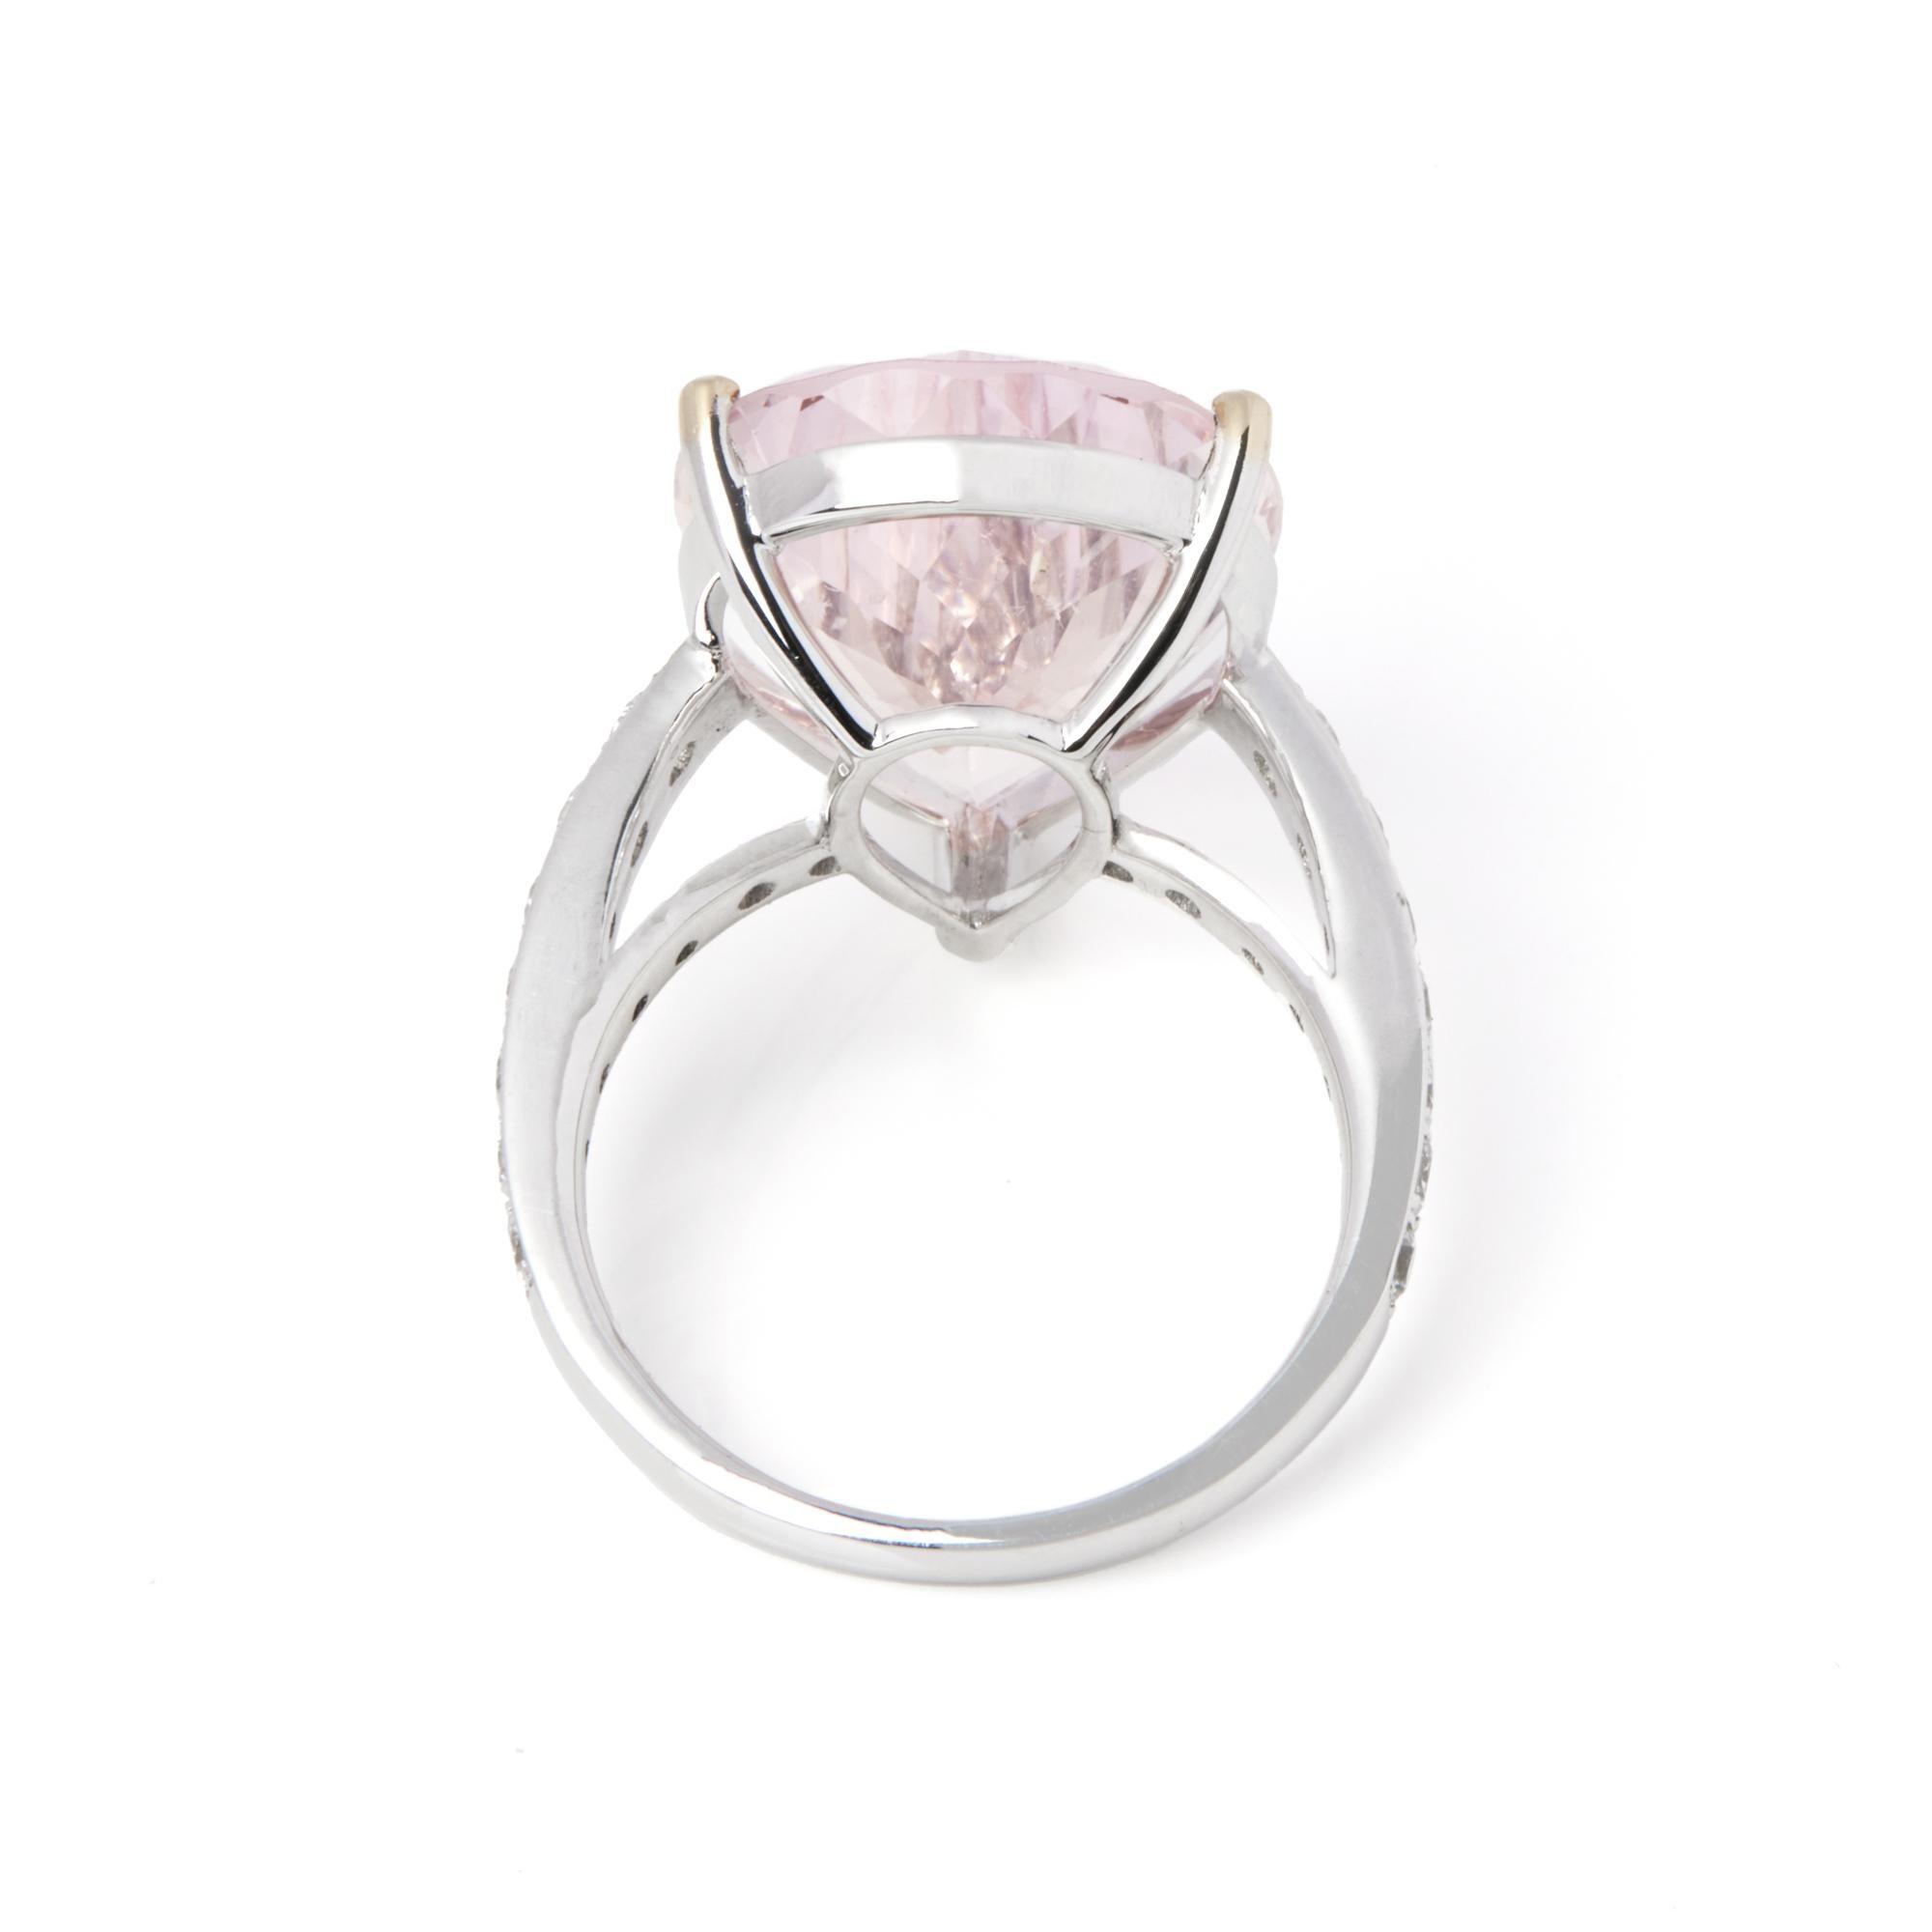 David Jerome Certified 12.24ct Pear Cut Morganite and Diamond Ring In New Condition For Sale In Bishop's Stortford, Hertfordshire